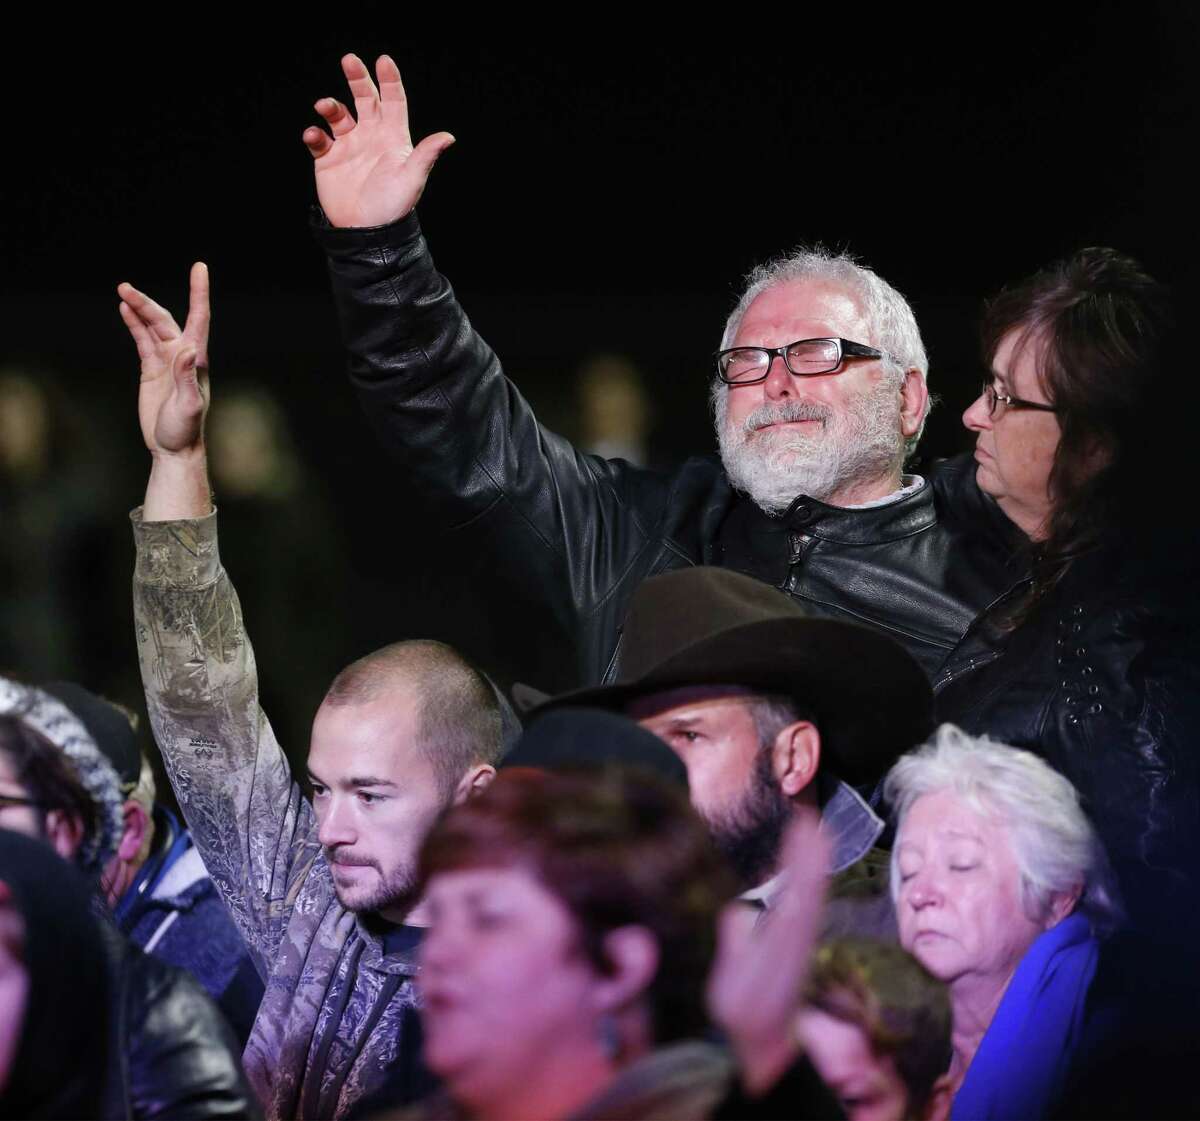 Stephen Willeford (top right) becomes emotional as he joins in prayer with the First Baptist Church families as Vice-president Mike Pence makes remarks at Floresville High School to pay respects to the victims of Sunday's church shooting at First Baptist Church in Sutherland Springs, Texas on Wednesday, Nov. 8, 2017. (Kin Man Hui/San Antonio Express-News)